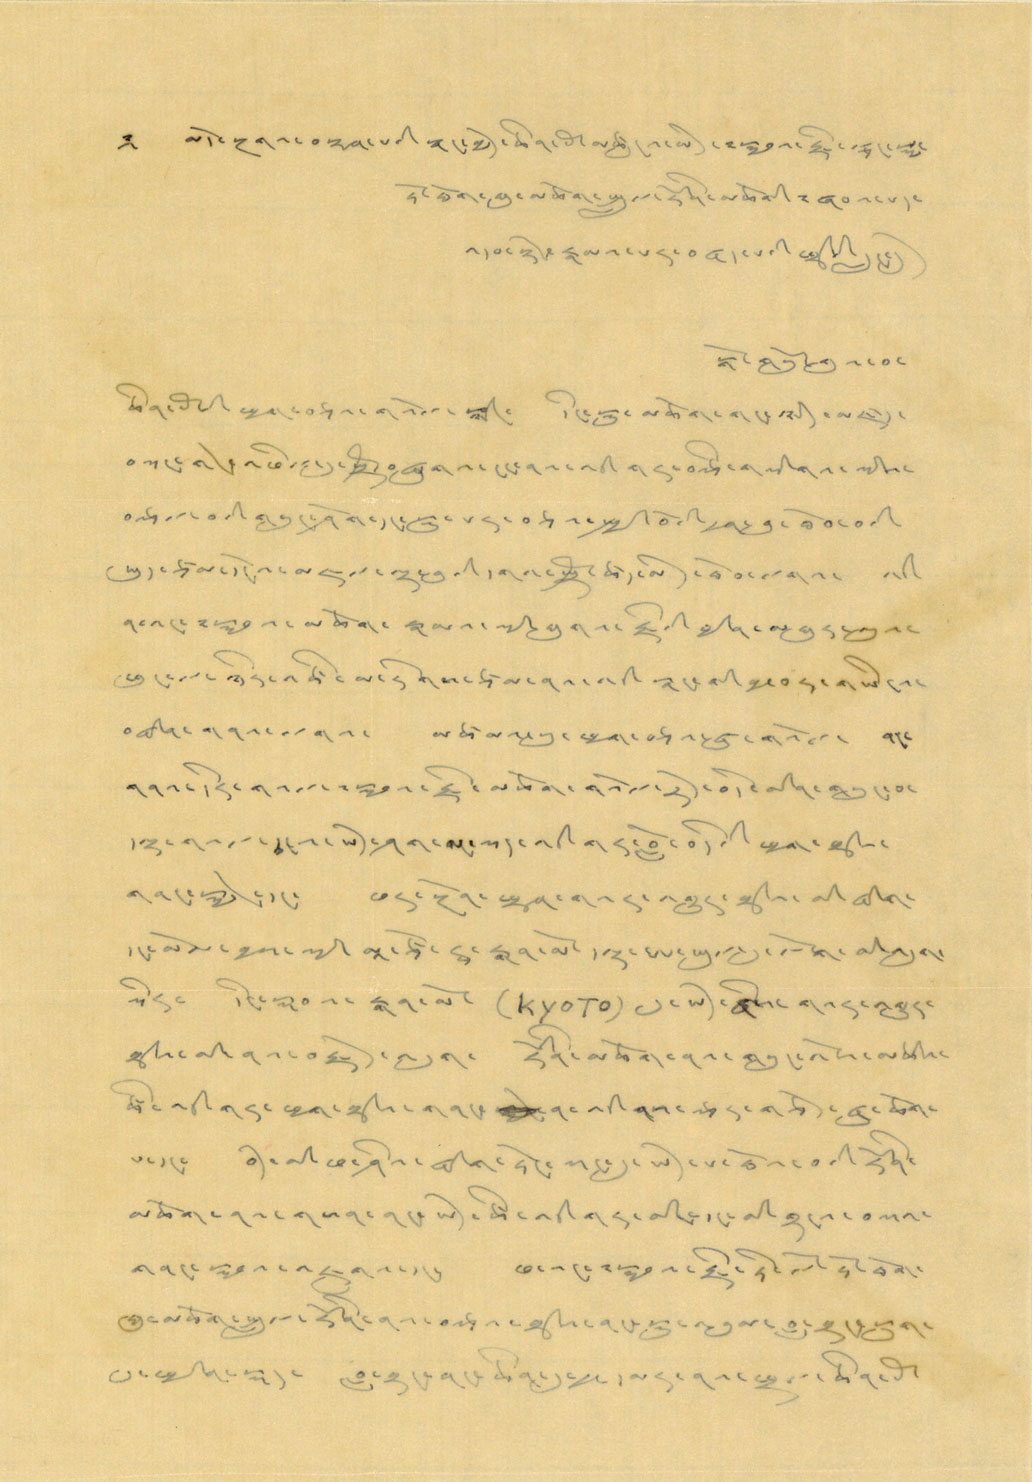 Letter from Thubten Jigme Norbu, eldest brother of the Fourteenth Dalai Lama, to the Seventh Changkya Khutukhtu, expressing concern for his health and briefing on the status the Kumbum Monastery and the political situation in Lhasa